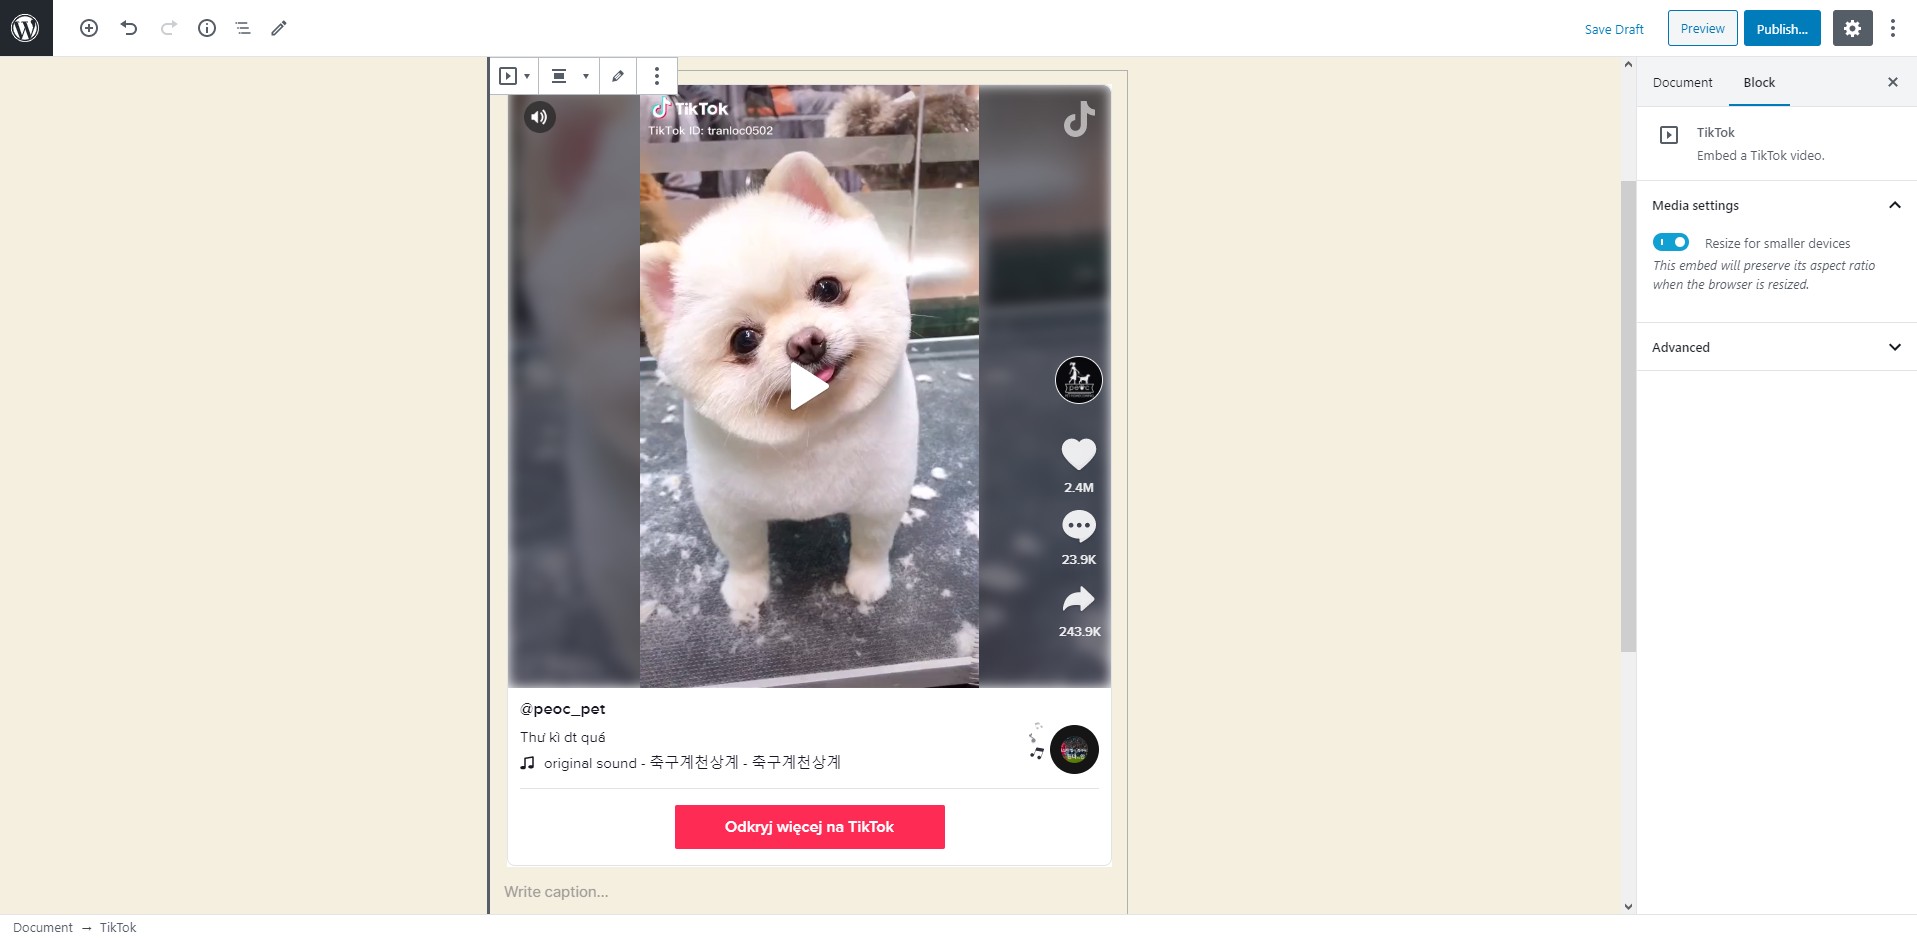 WordPress 5.4 will introduce an option to embed TikTok videos into your posts.